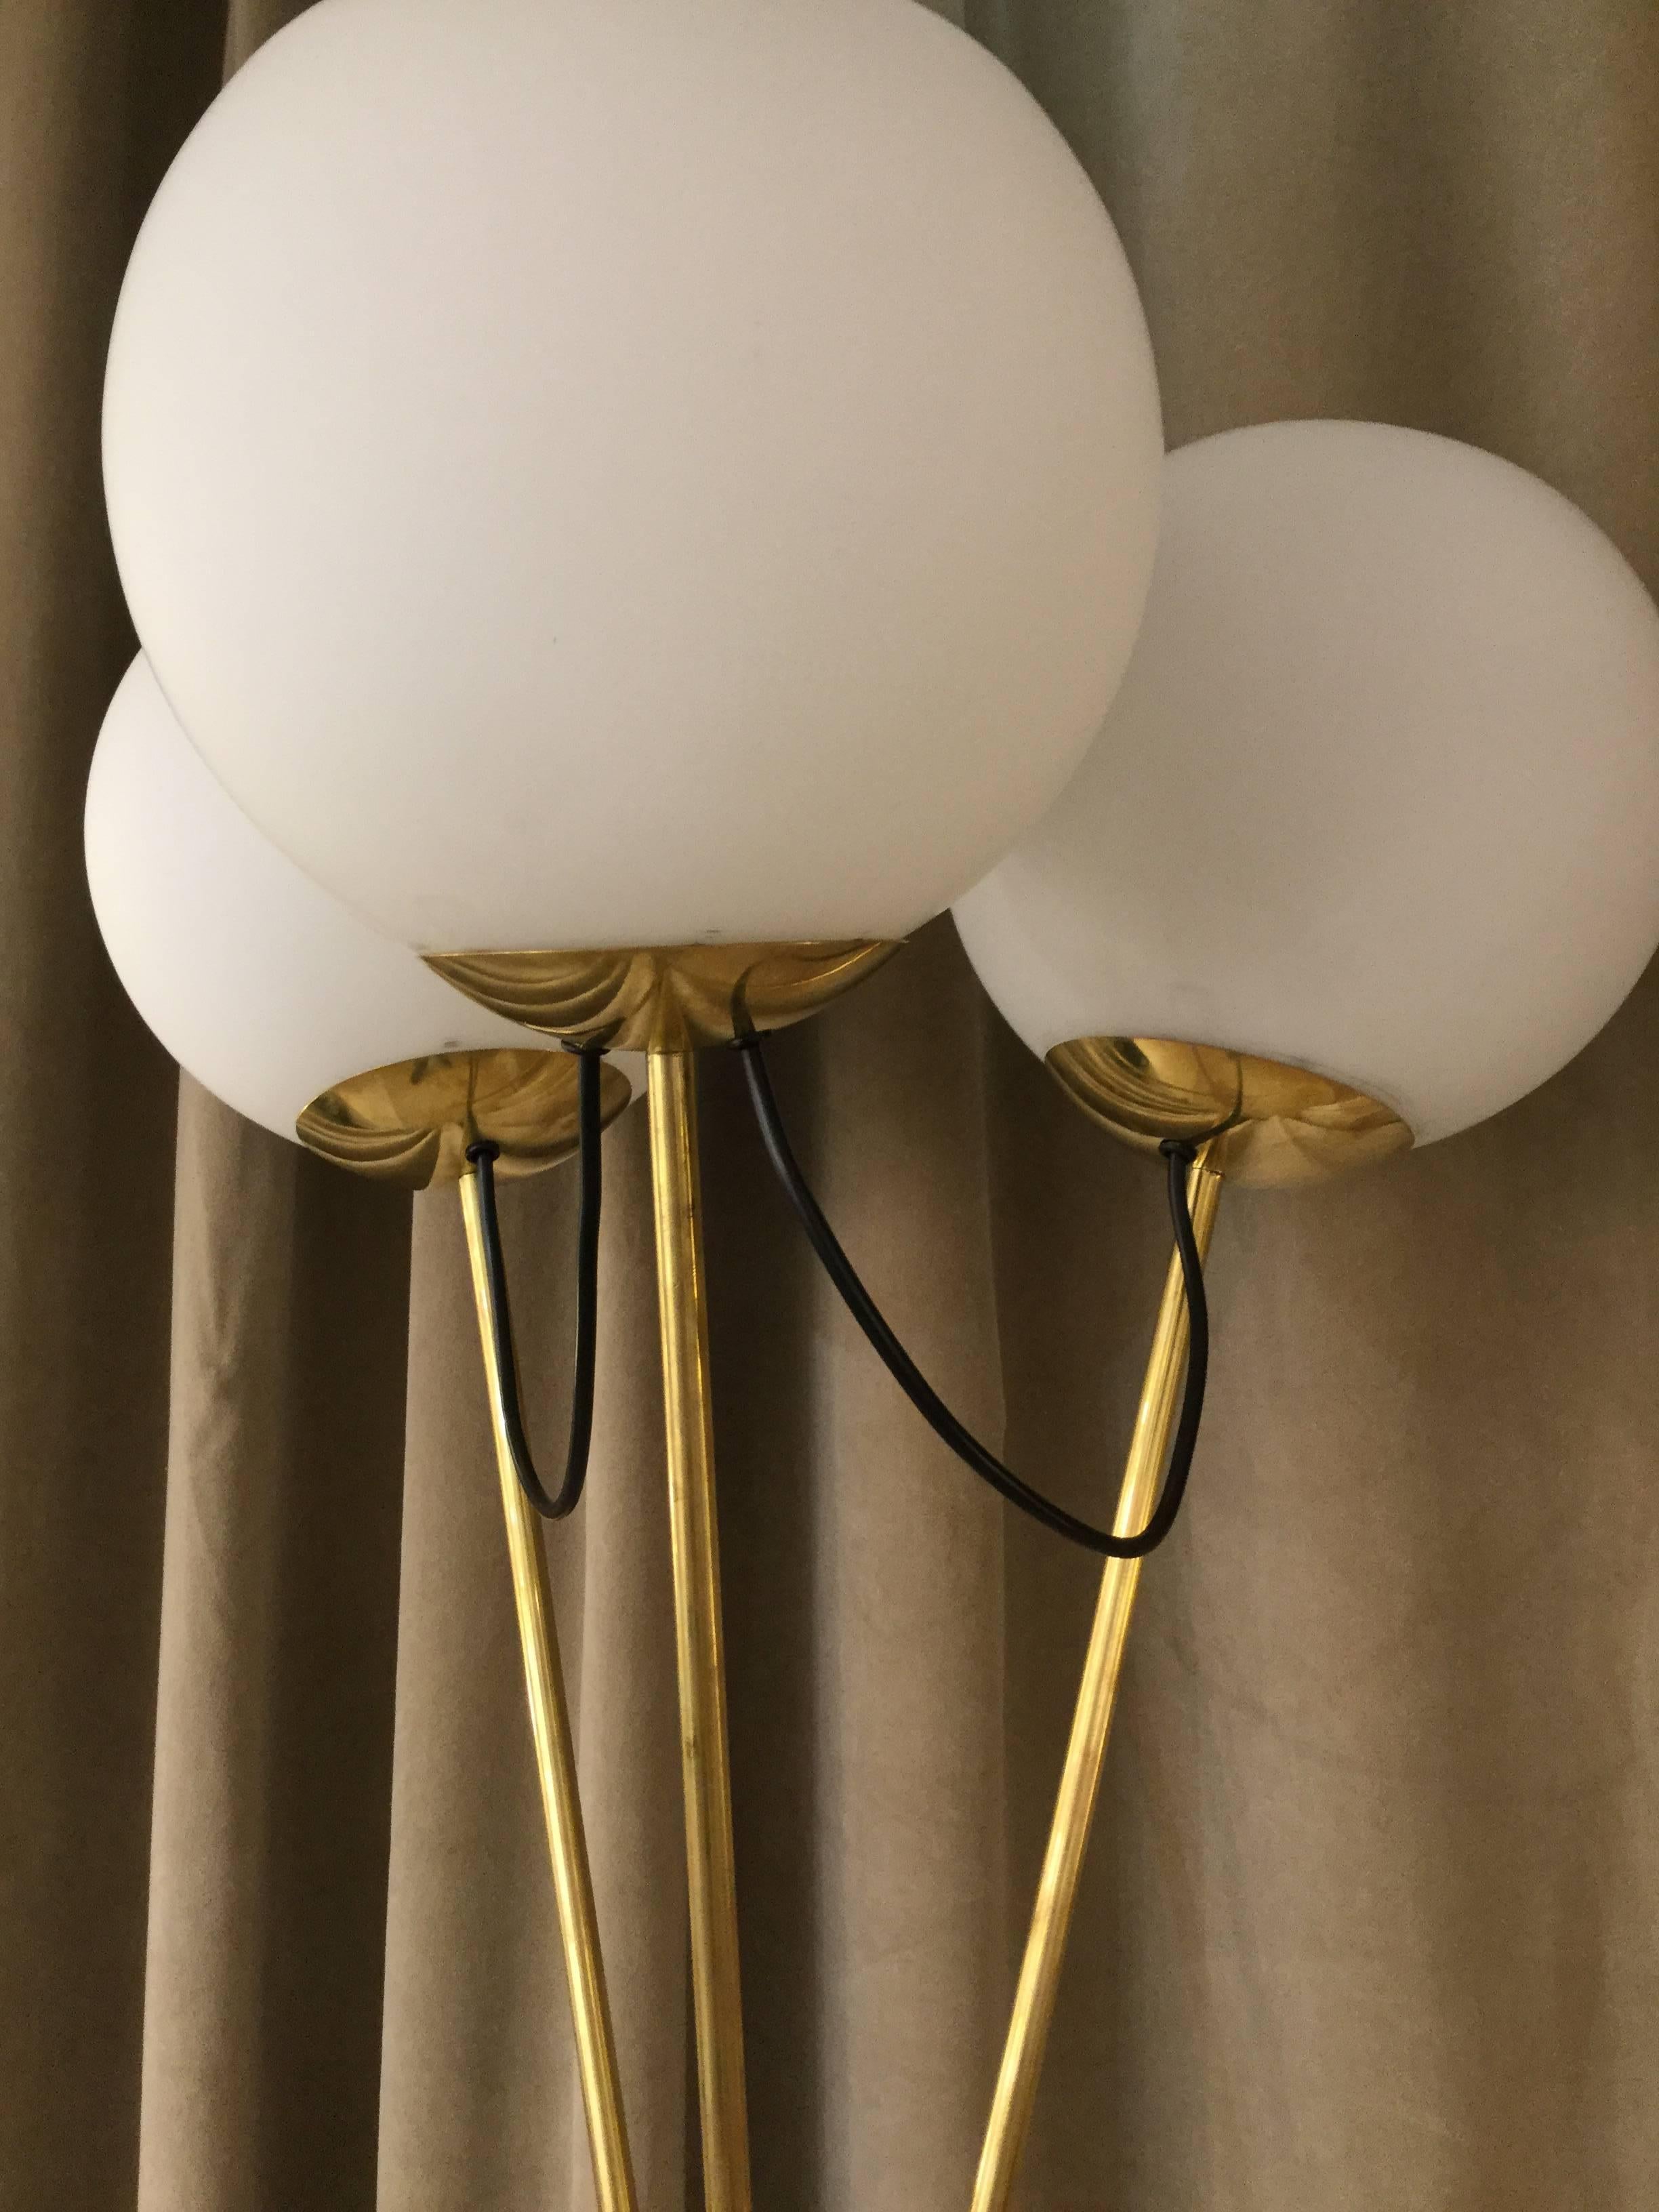 A pair of Italian designed floor lamps three spherical glass shades on brass tripod legs in the style of Stilnovo.